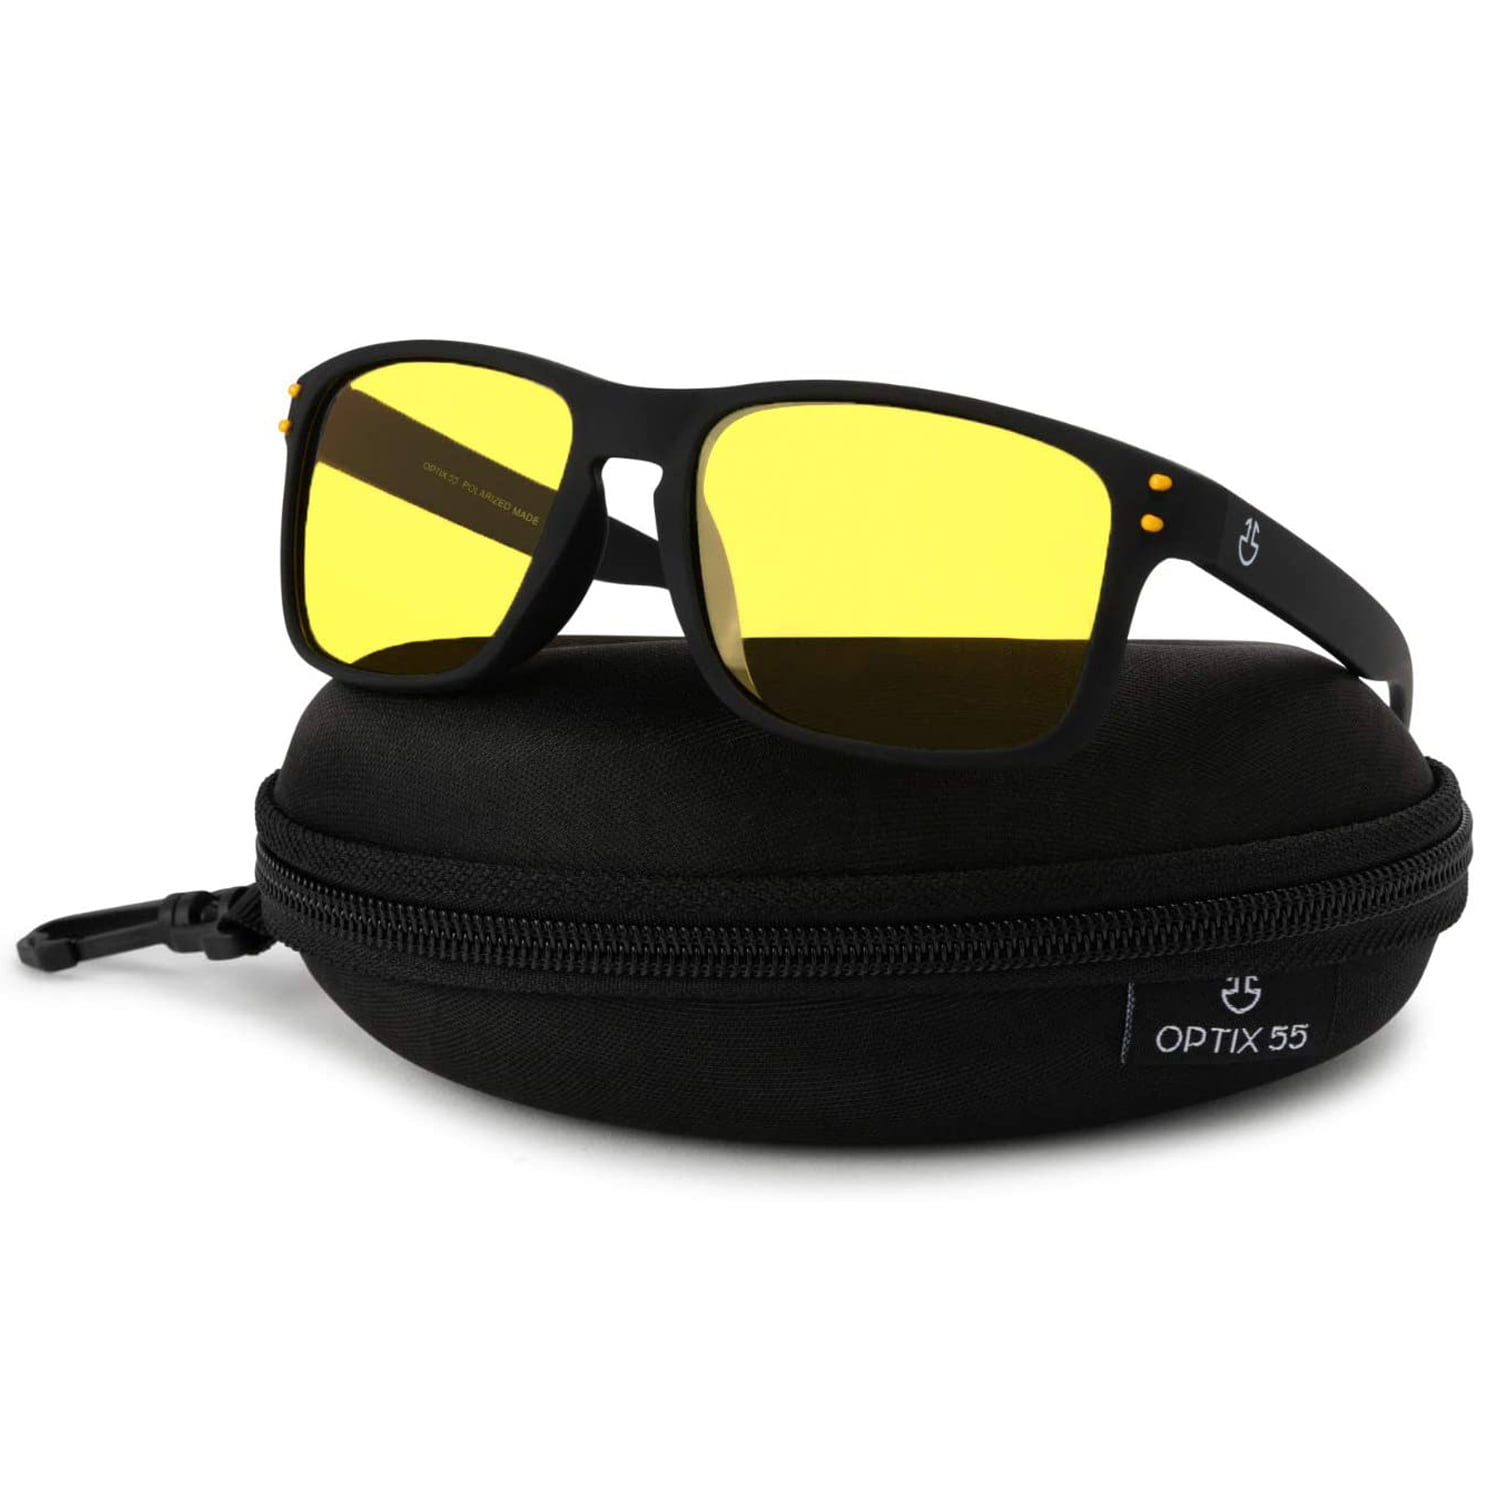 Bifocal Glasses Yellow Tint Night Vision Riding Driving Sports Indoor Unisex